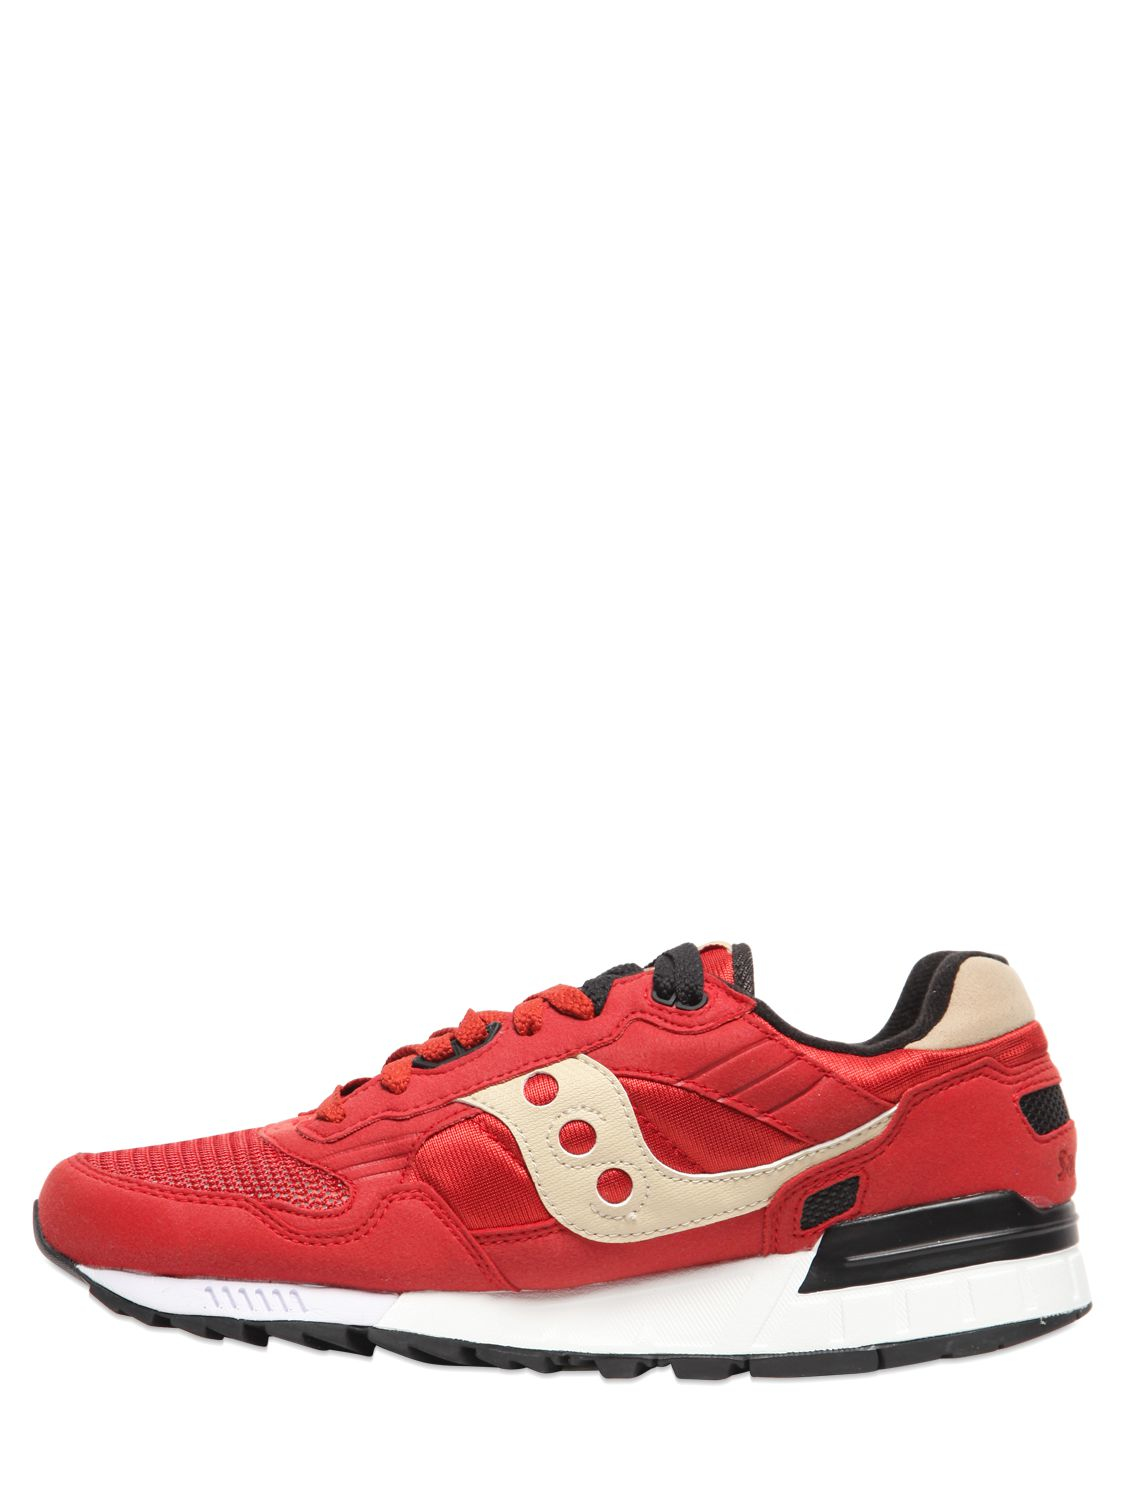 Saucony Shadow 5000 Suede & Mesh Sneakers in Red for Men - Lyst